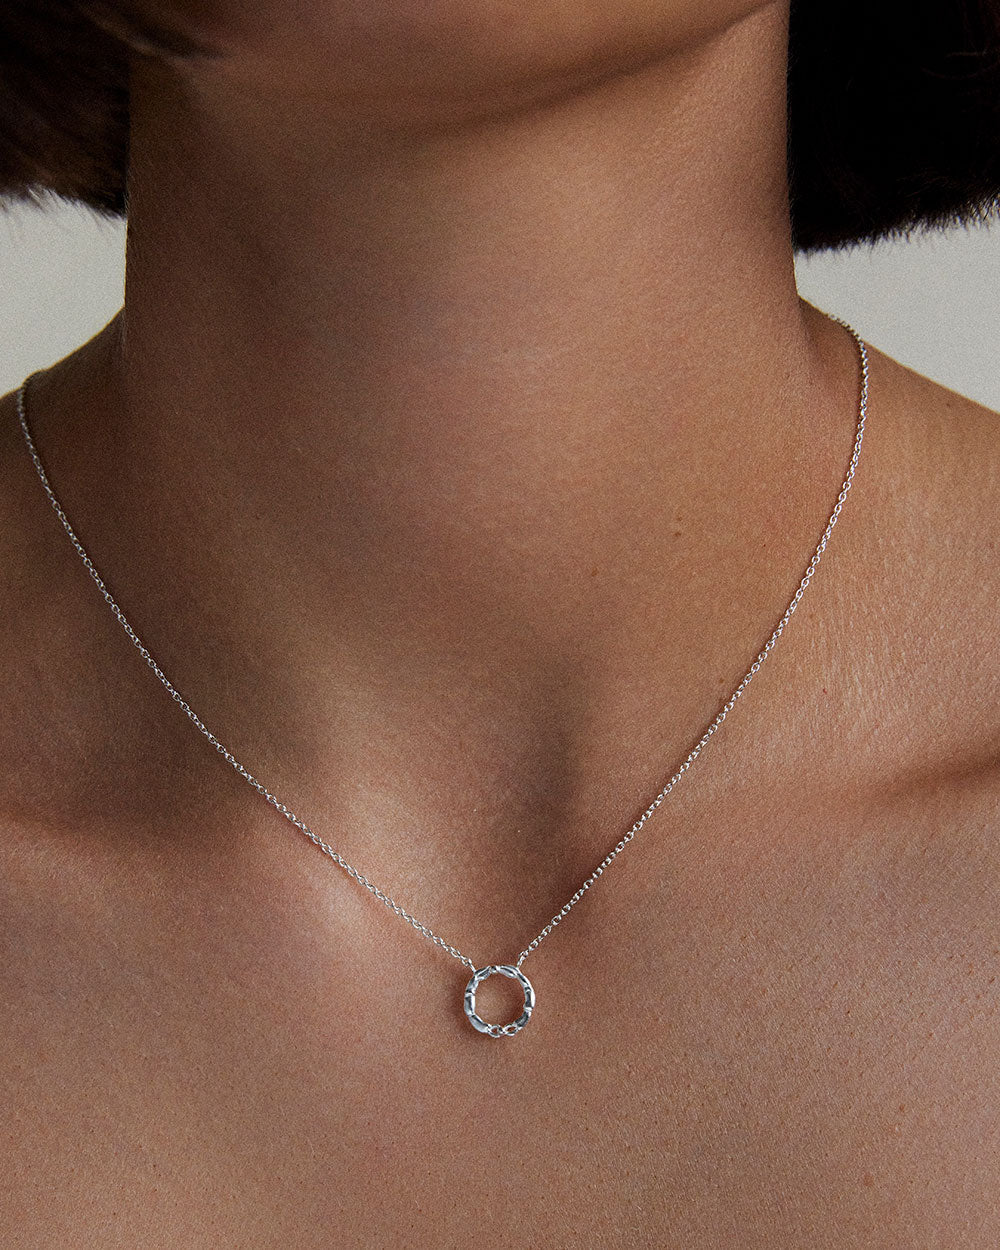 CANCER STAR SIGN NECKLACE (STERLING SILVER)